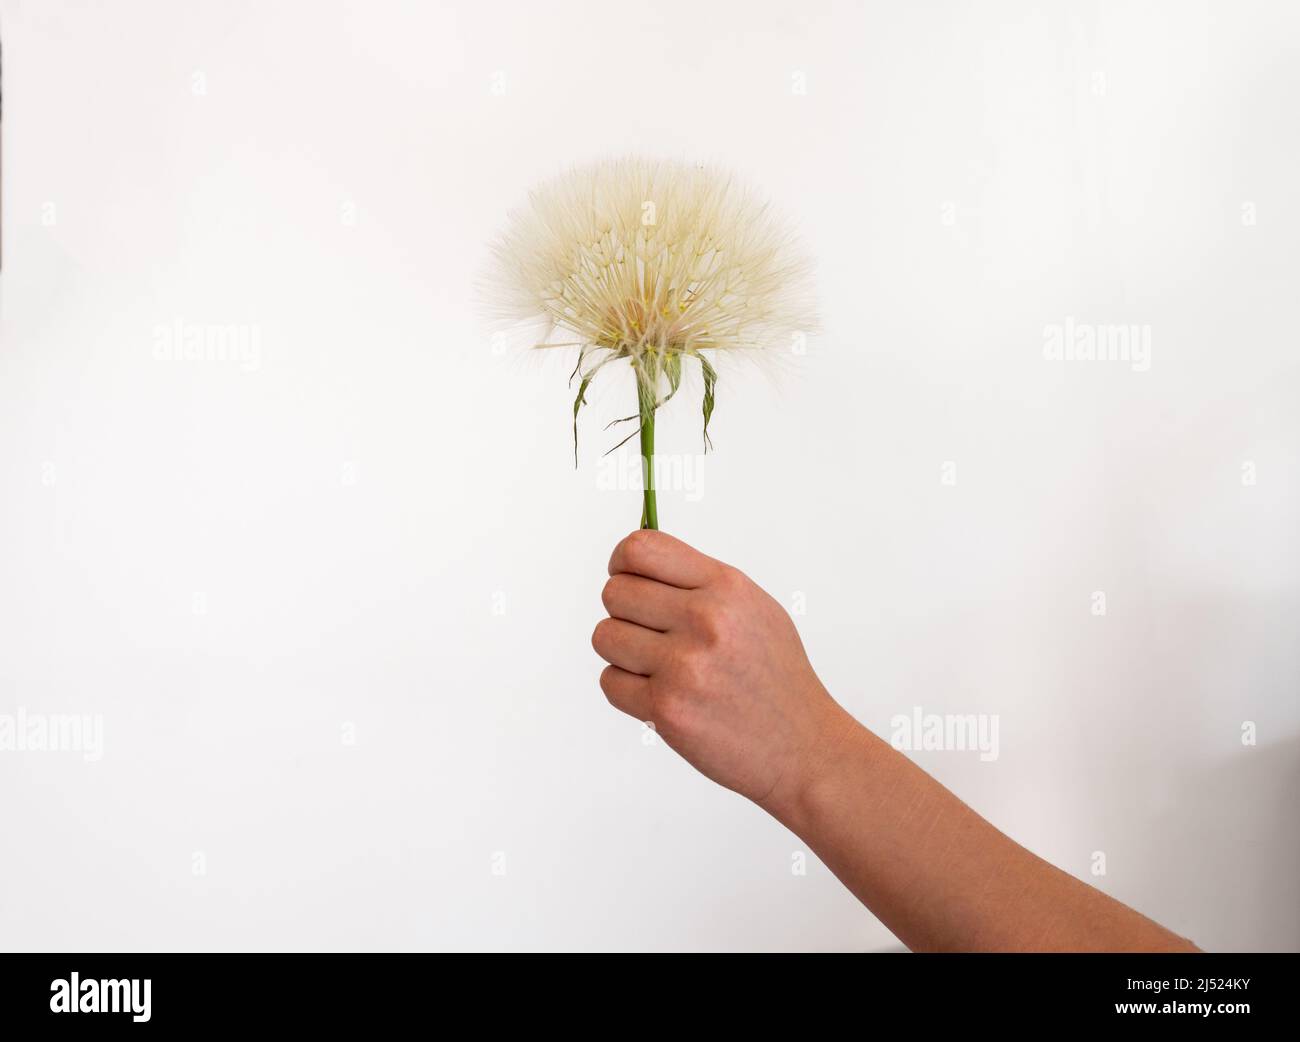 giant dandelion or salsify held againts a white background .summer spring . Stock Photo